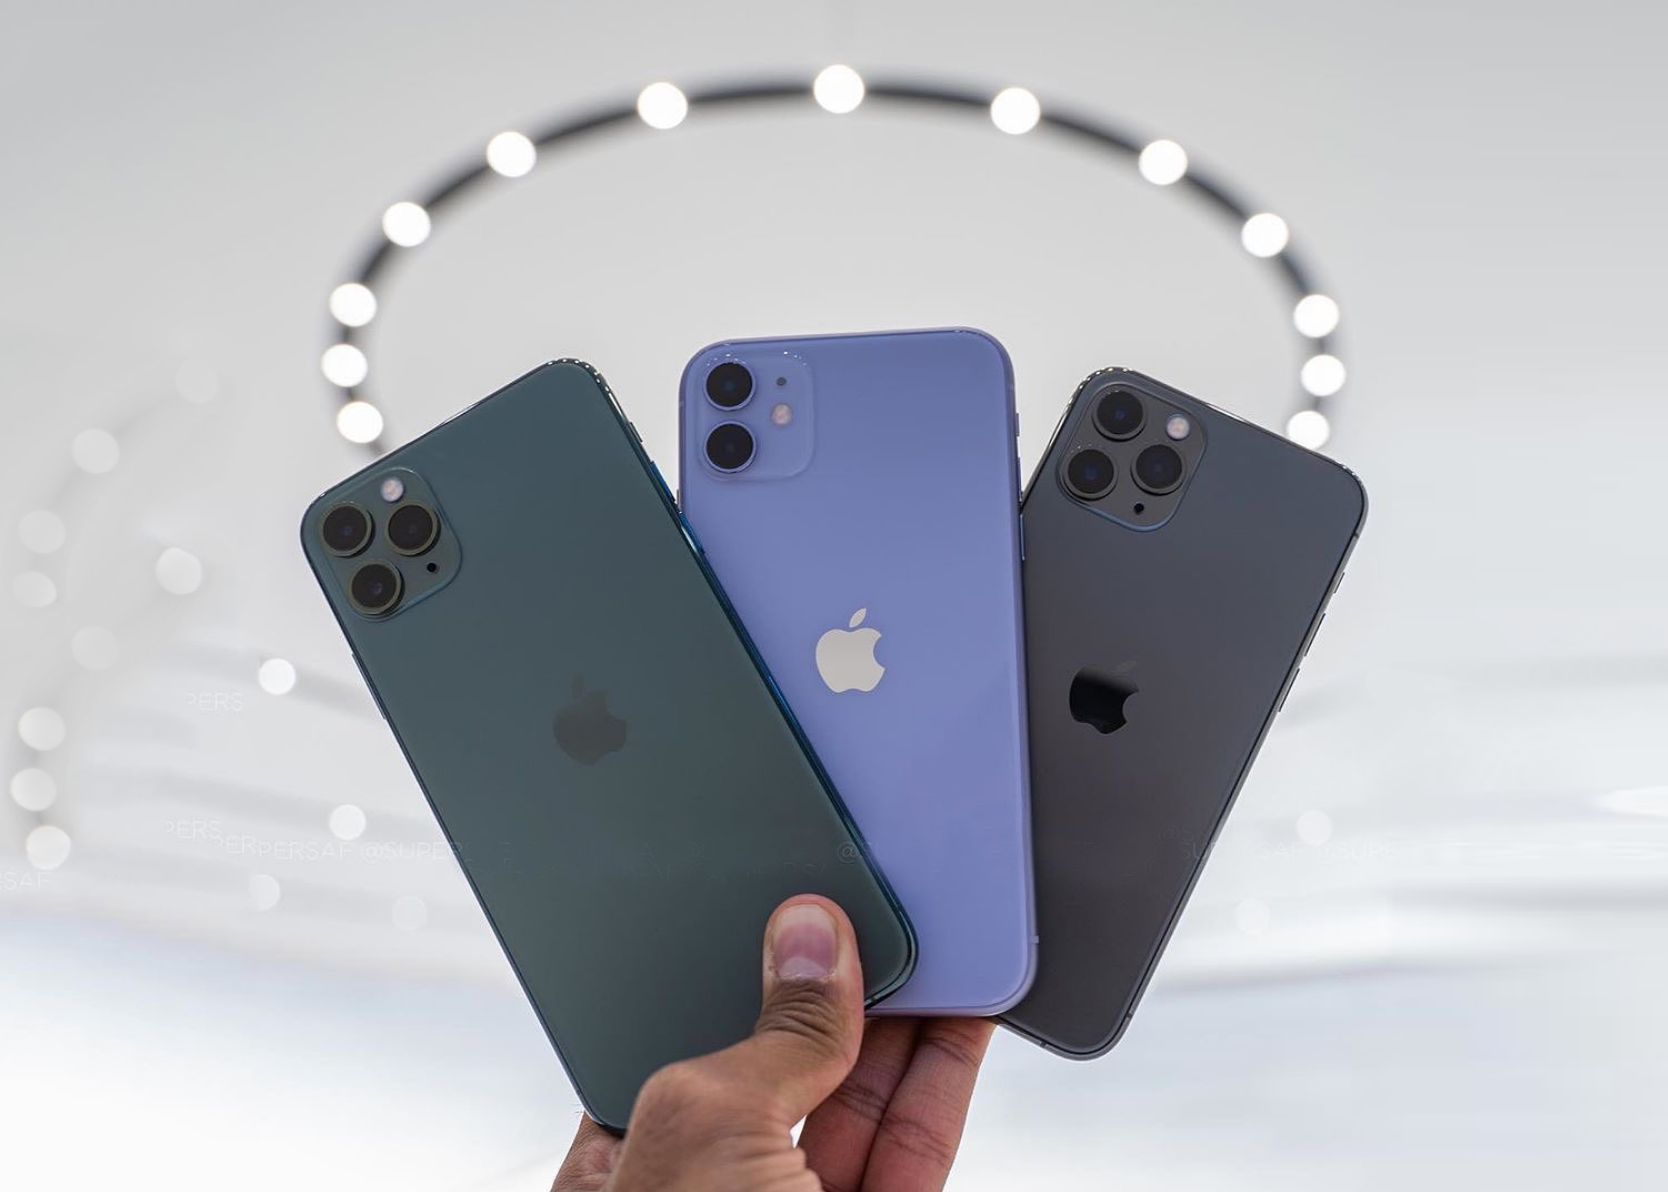 Bảng giá iPhone 11, iPhone 11 Pro, iPhone 11 Pro Max